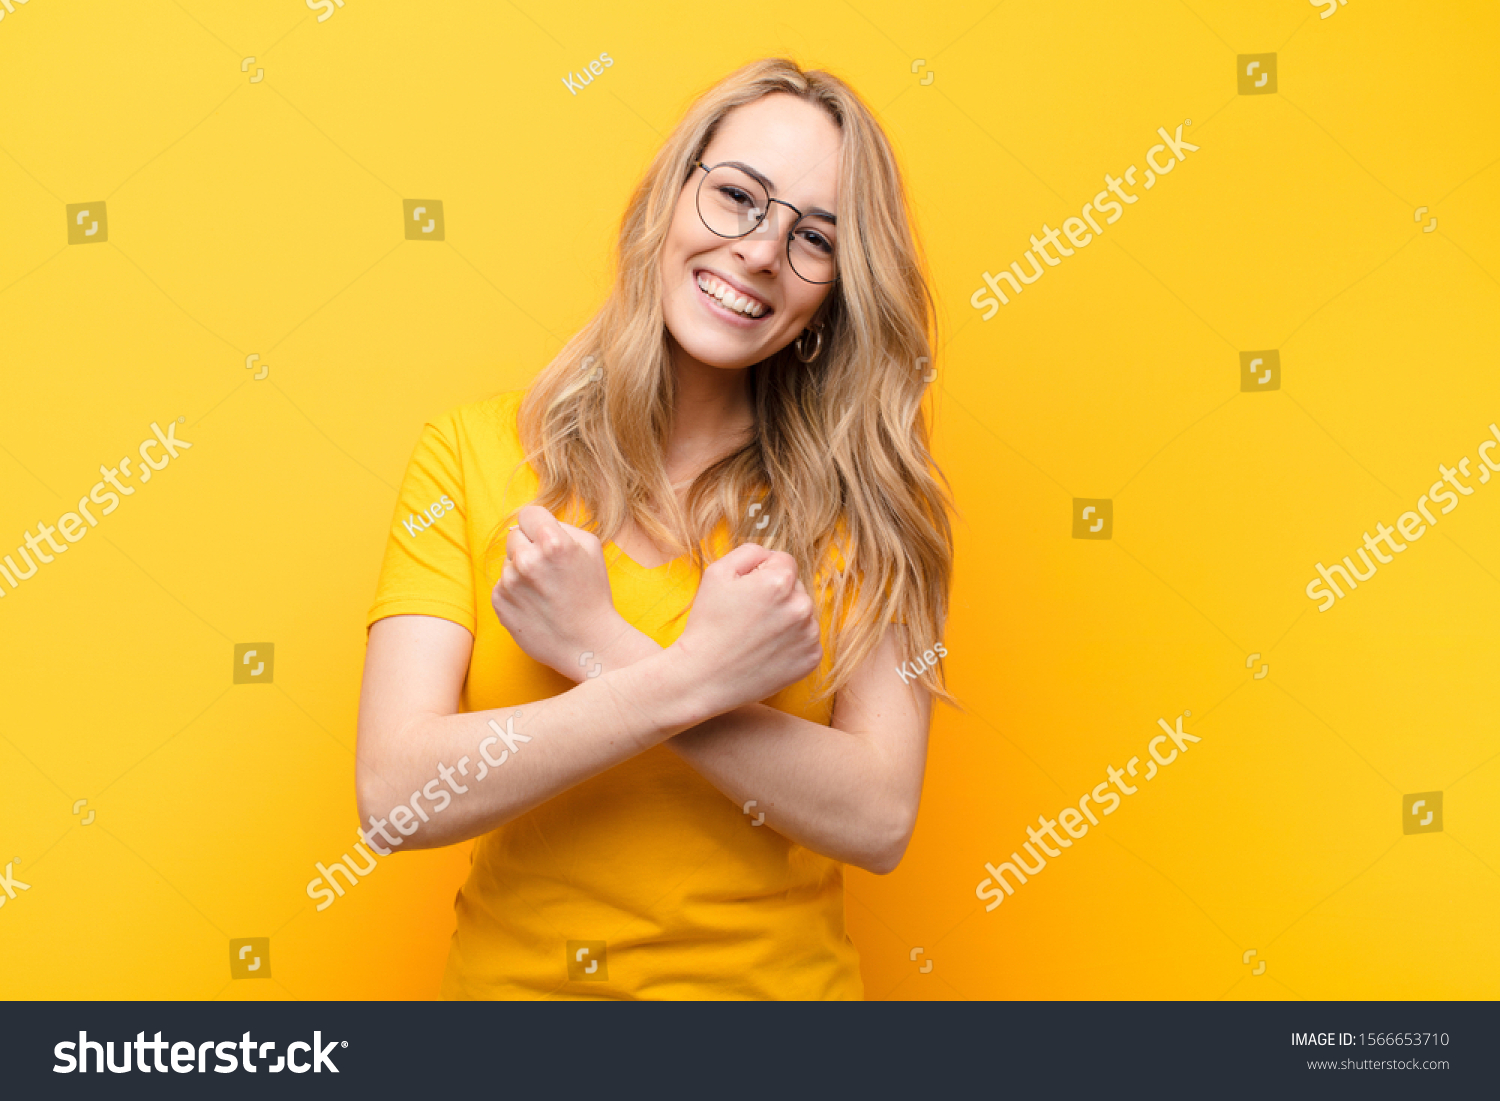 young pretty blonde woman smiling cheerfully and celebrating, with fists clenched and arms crossed, feeling happy and positive against flat color wall #1566653710